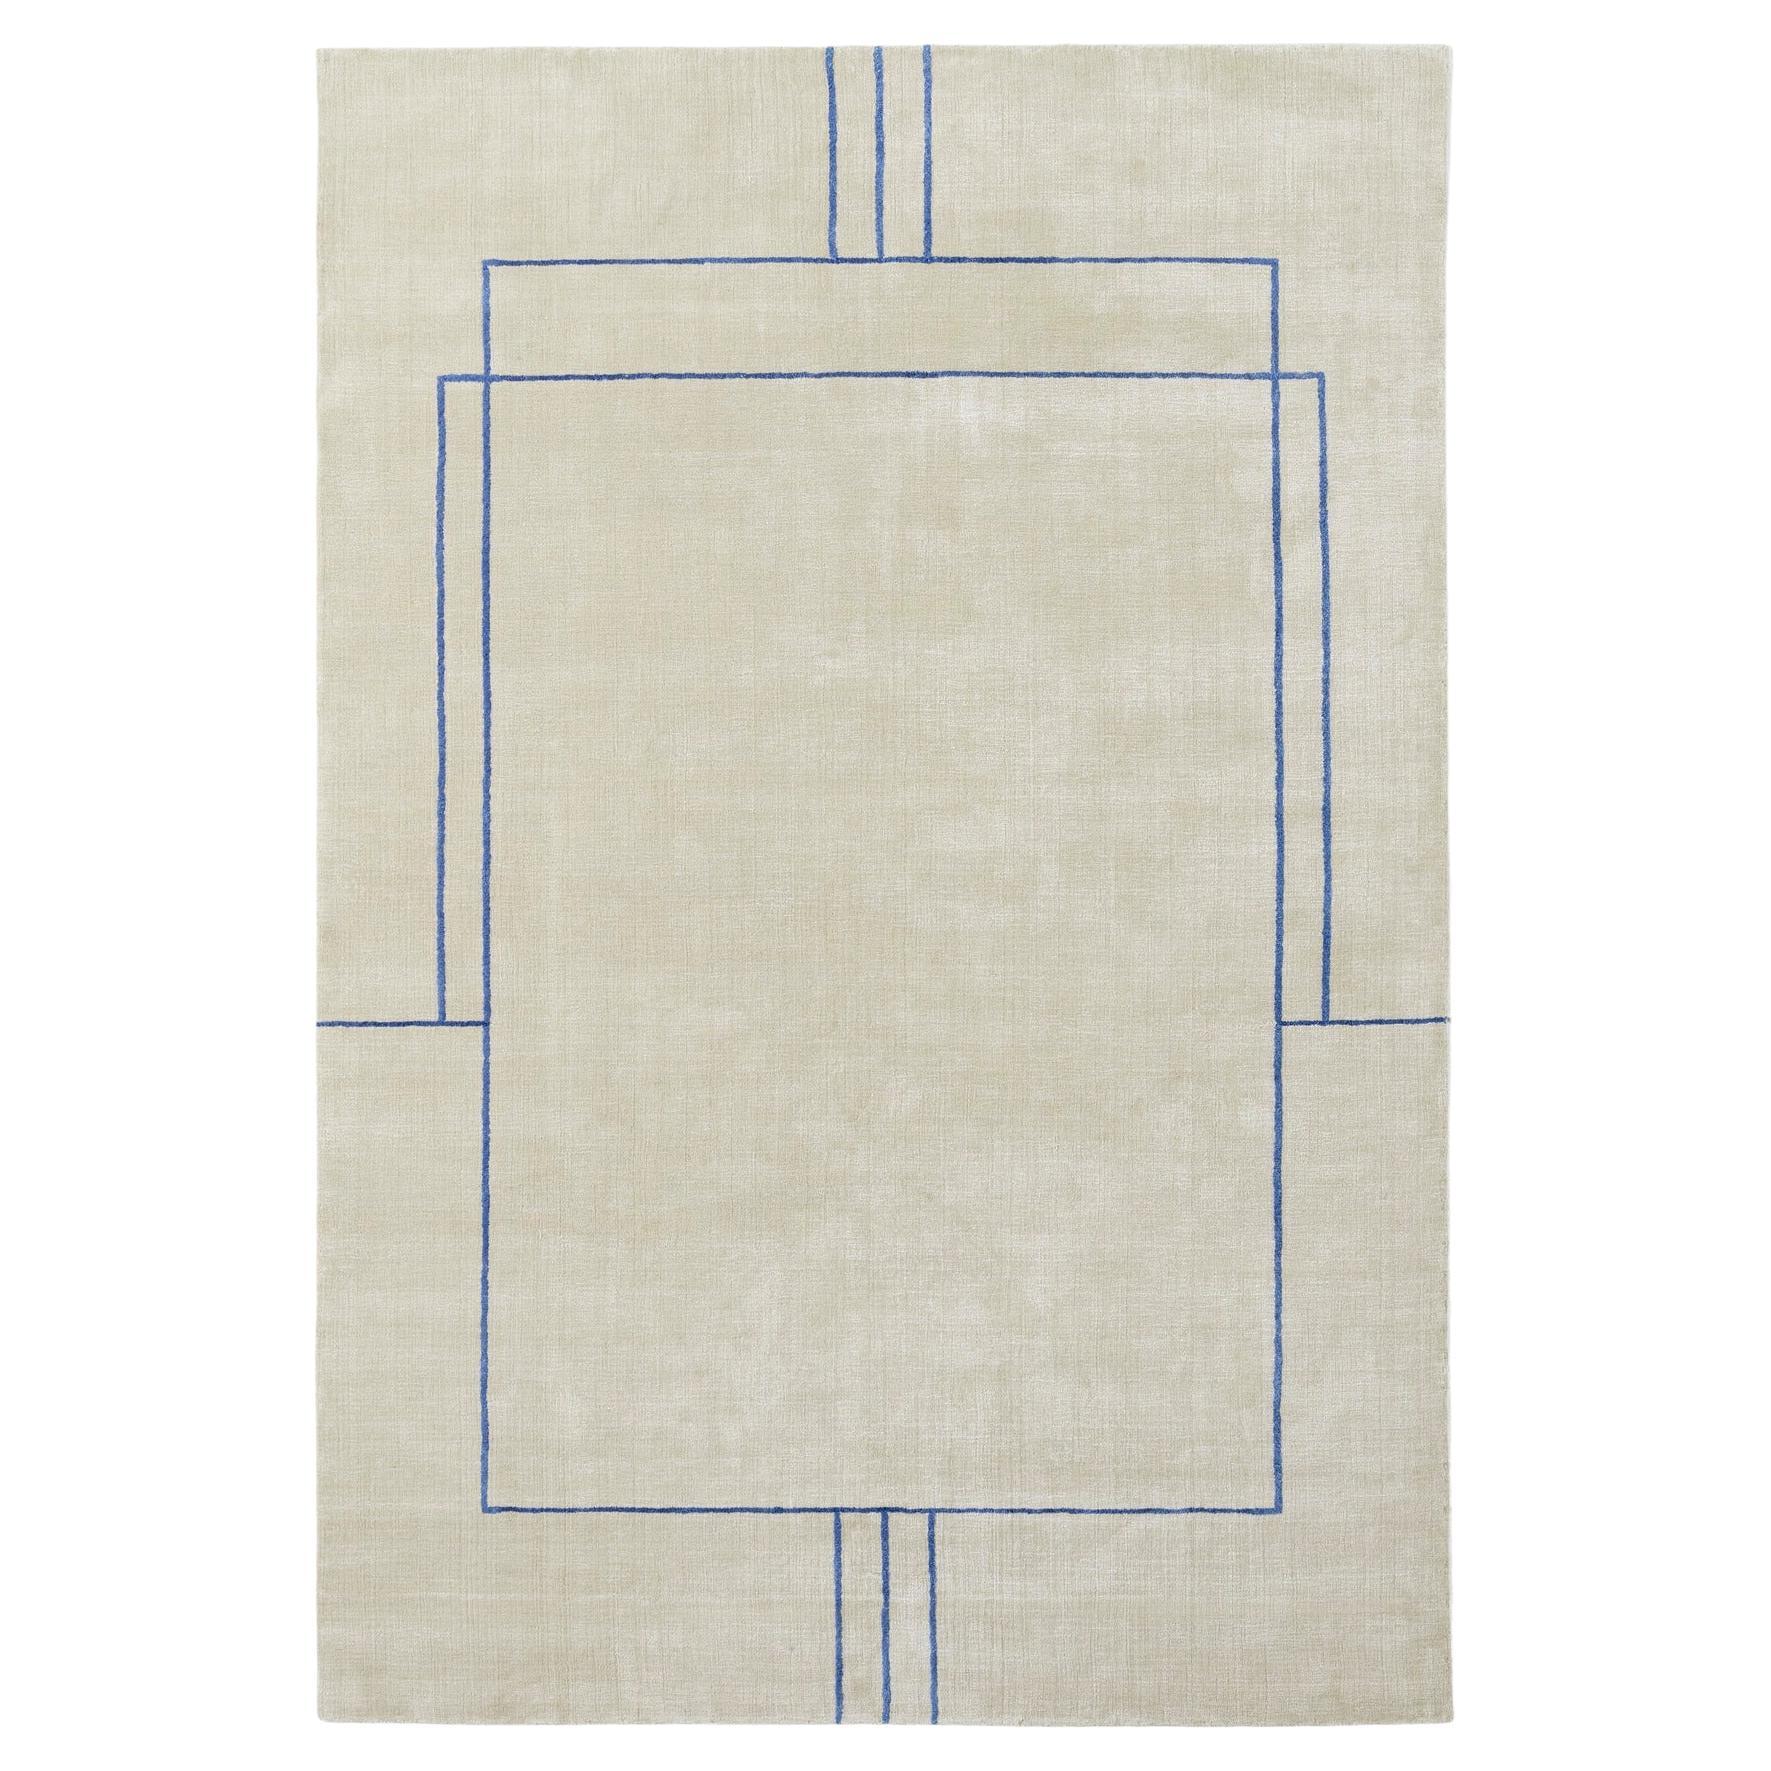 Cruise AP12 Rug, Aden Desert Beige, Designed by All the Way to Paris for &T